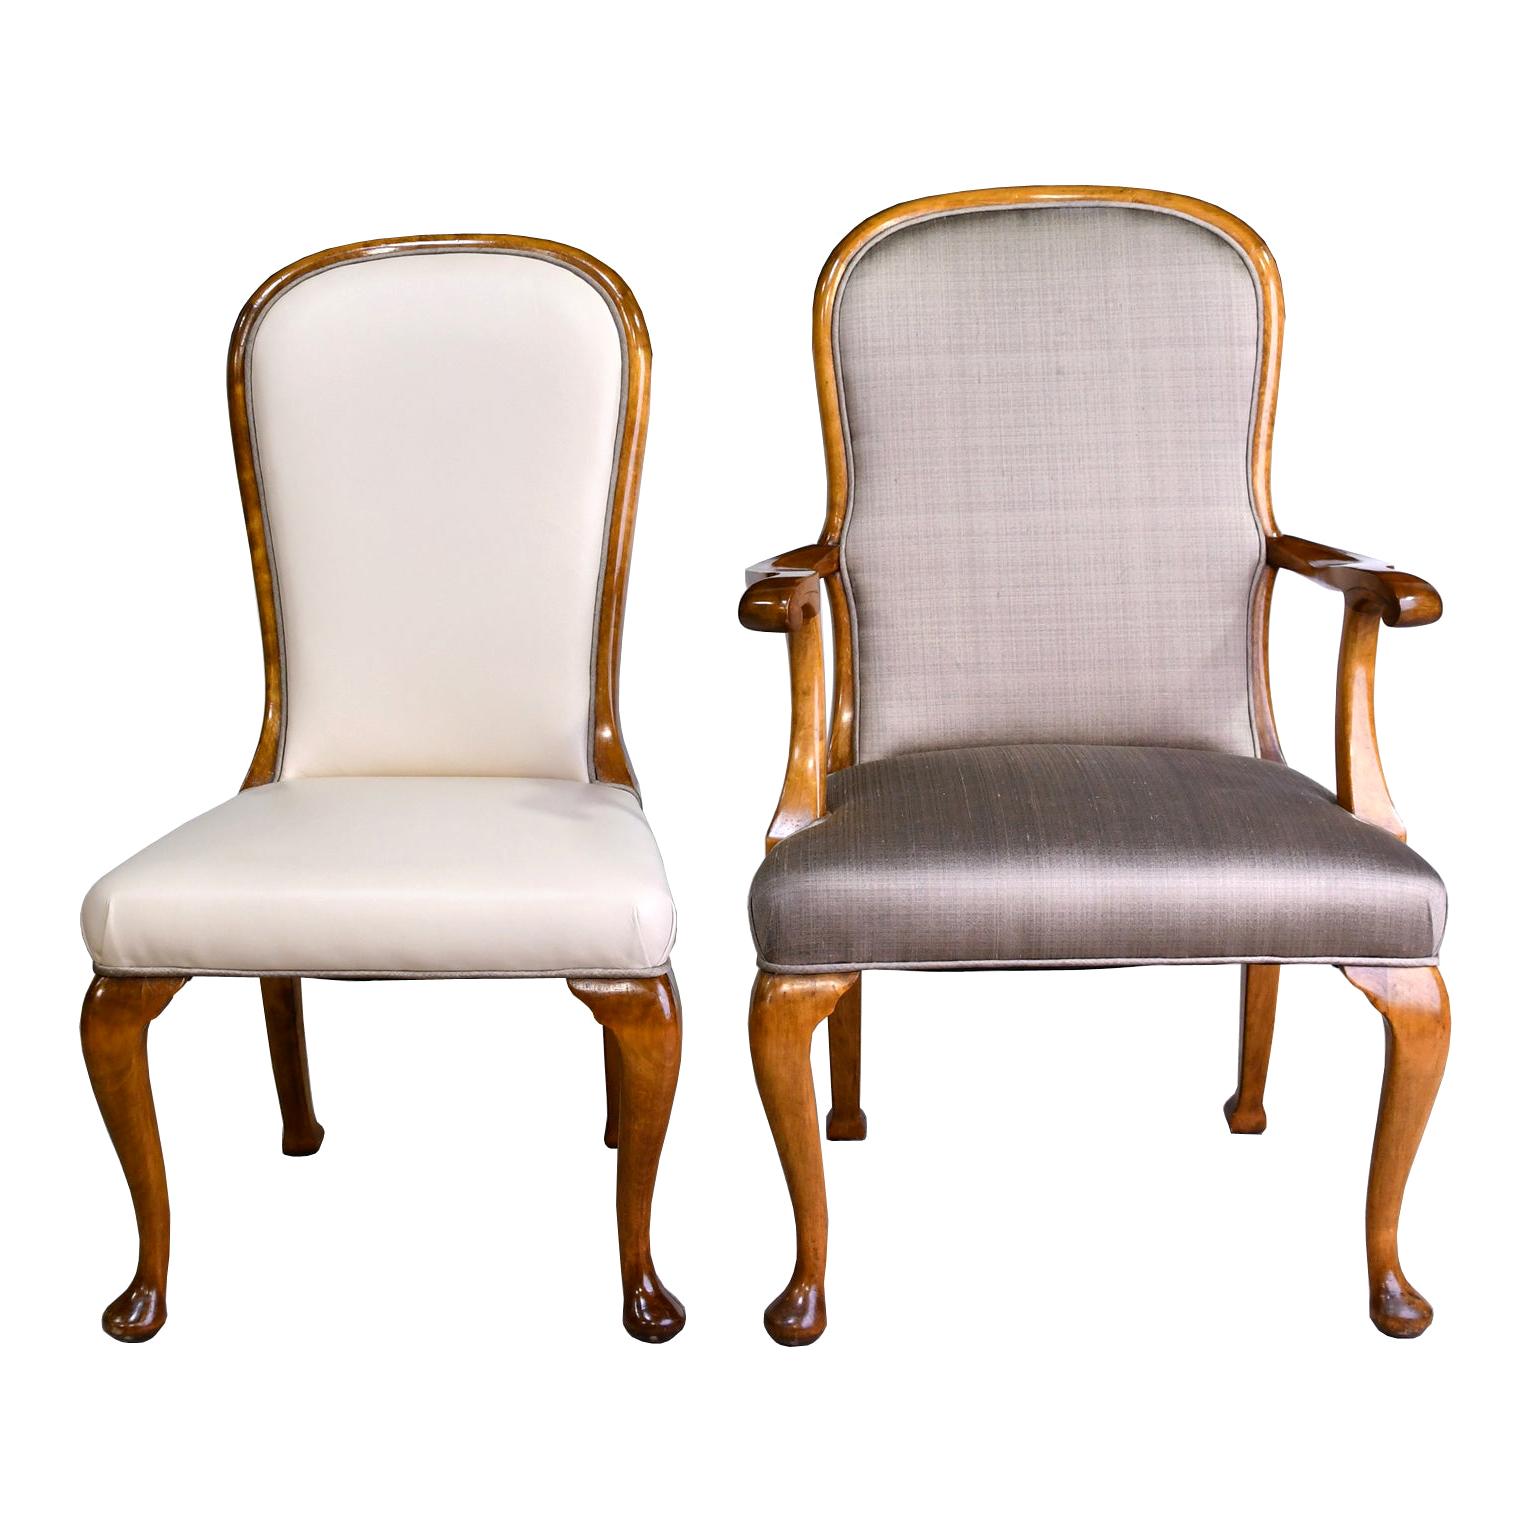 Set of 10 Mid-20th Century Birch Dining Chairs with Upholstered Back & Seats